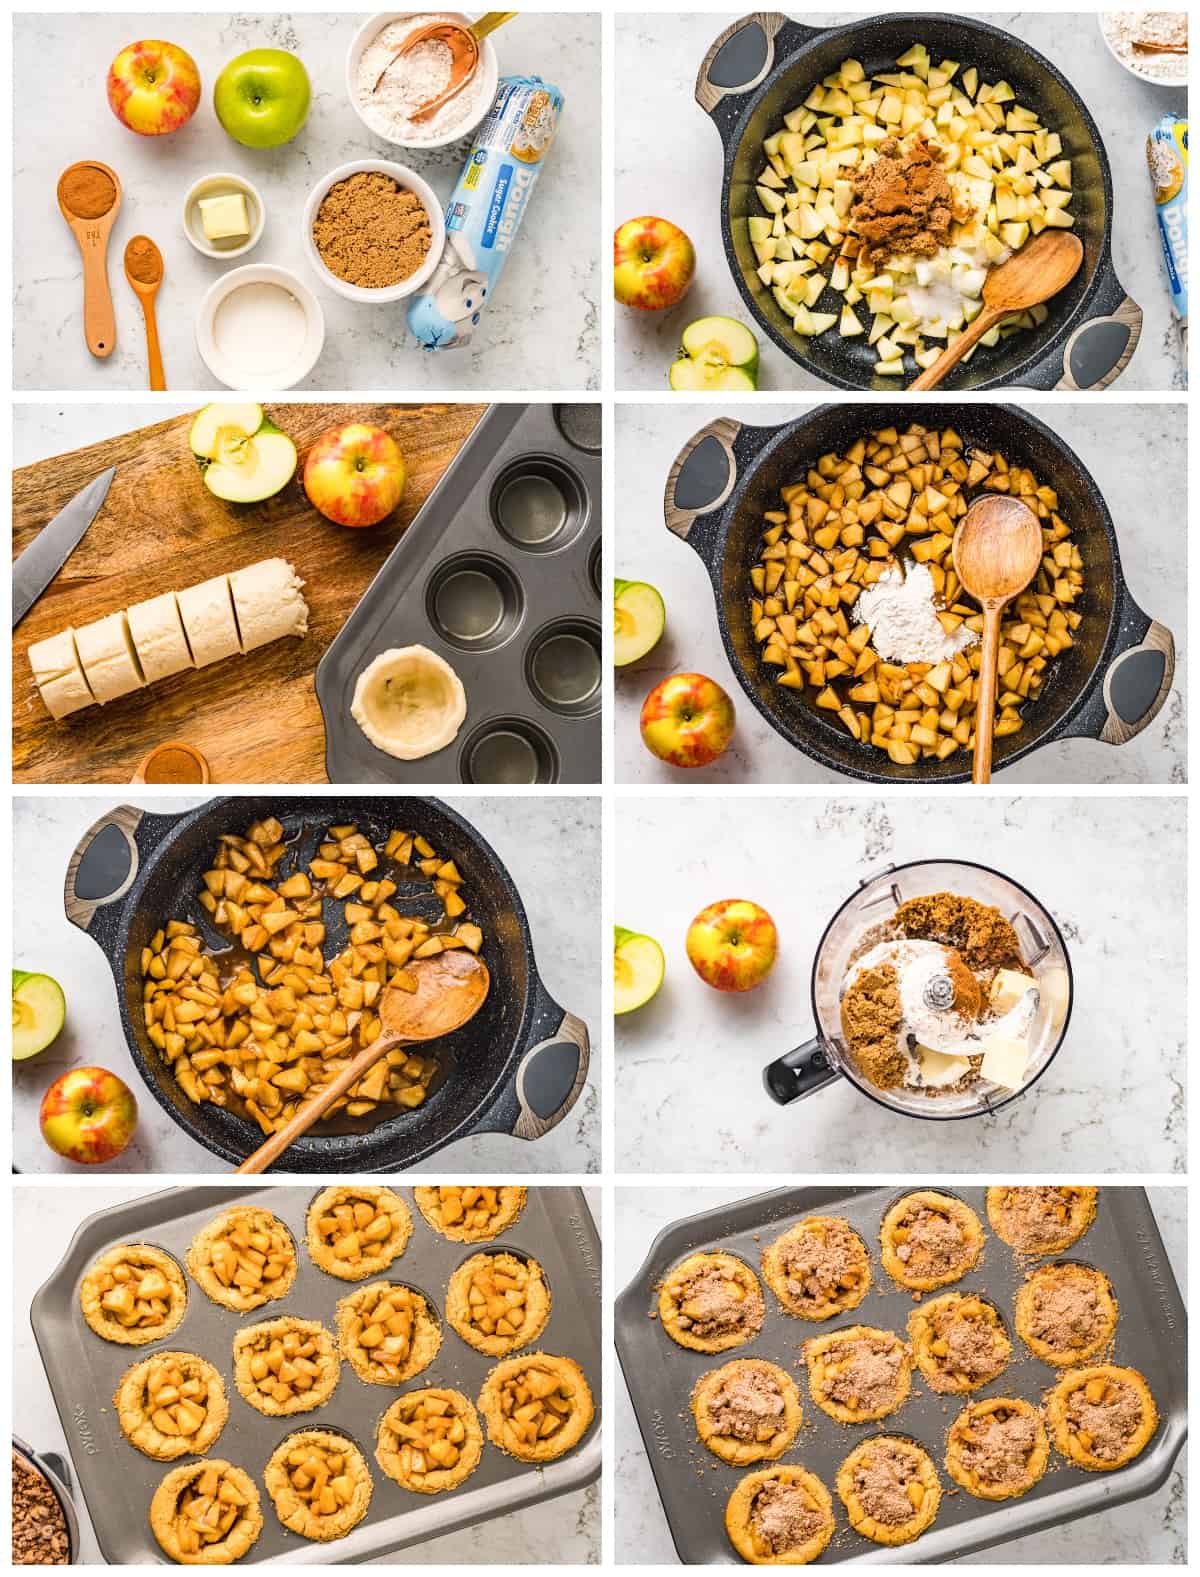 how to make mini apple pies step by step photo instructions